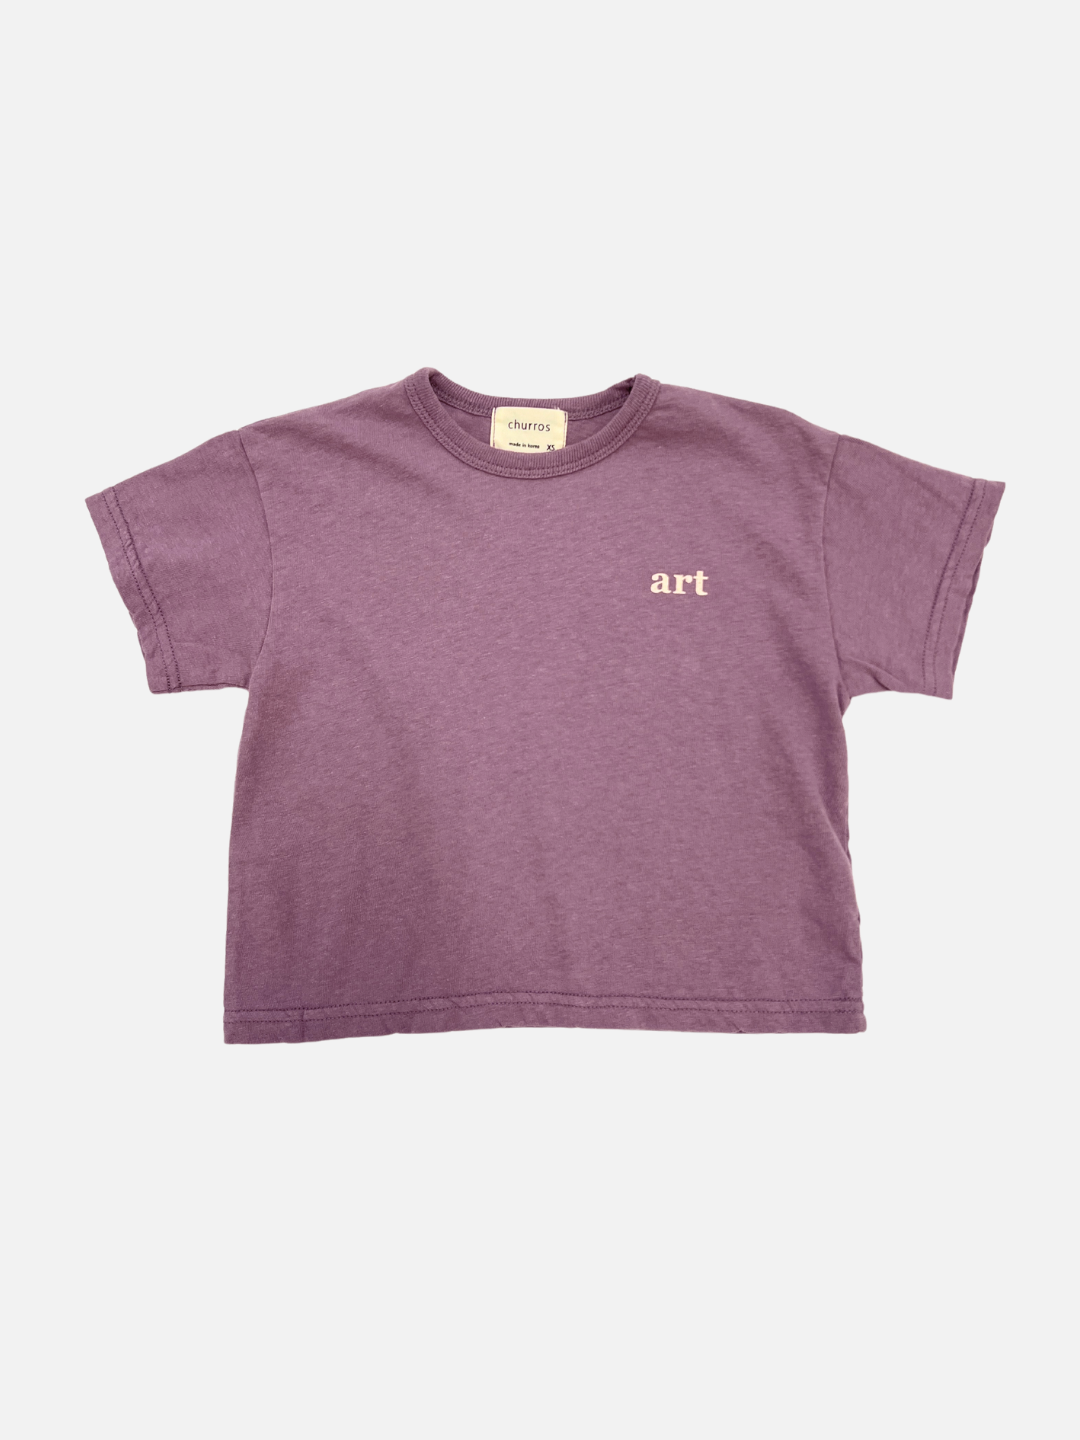 Front view of the kid's Studio tee in mauve, with the words "art" printed on the right side